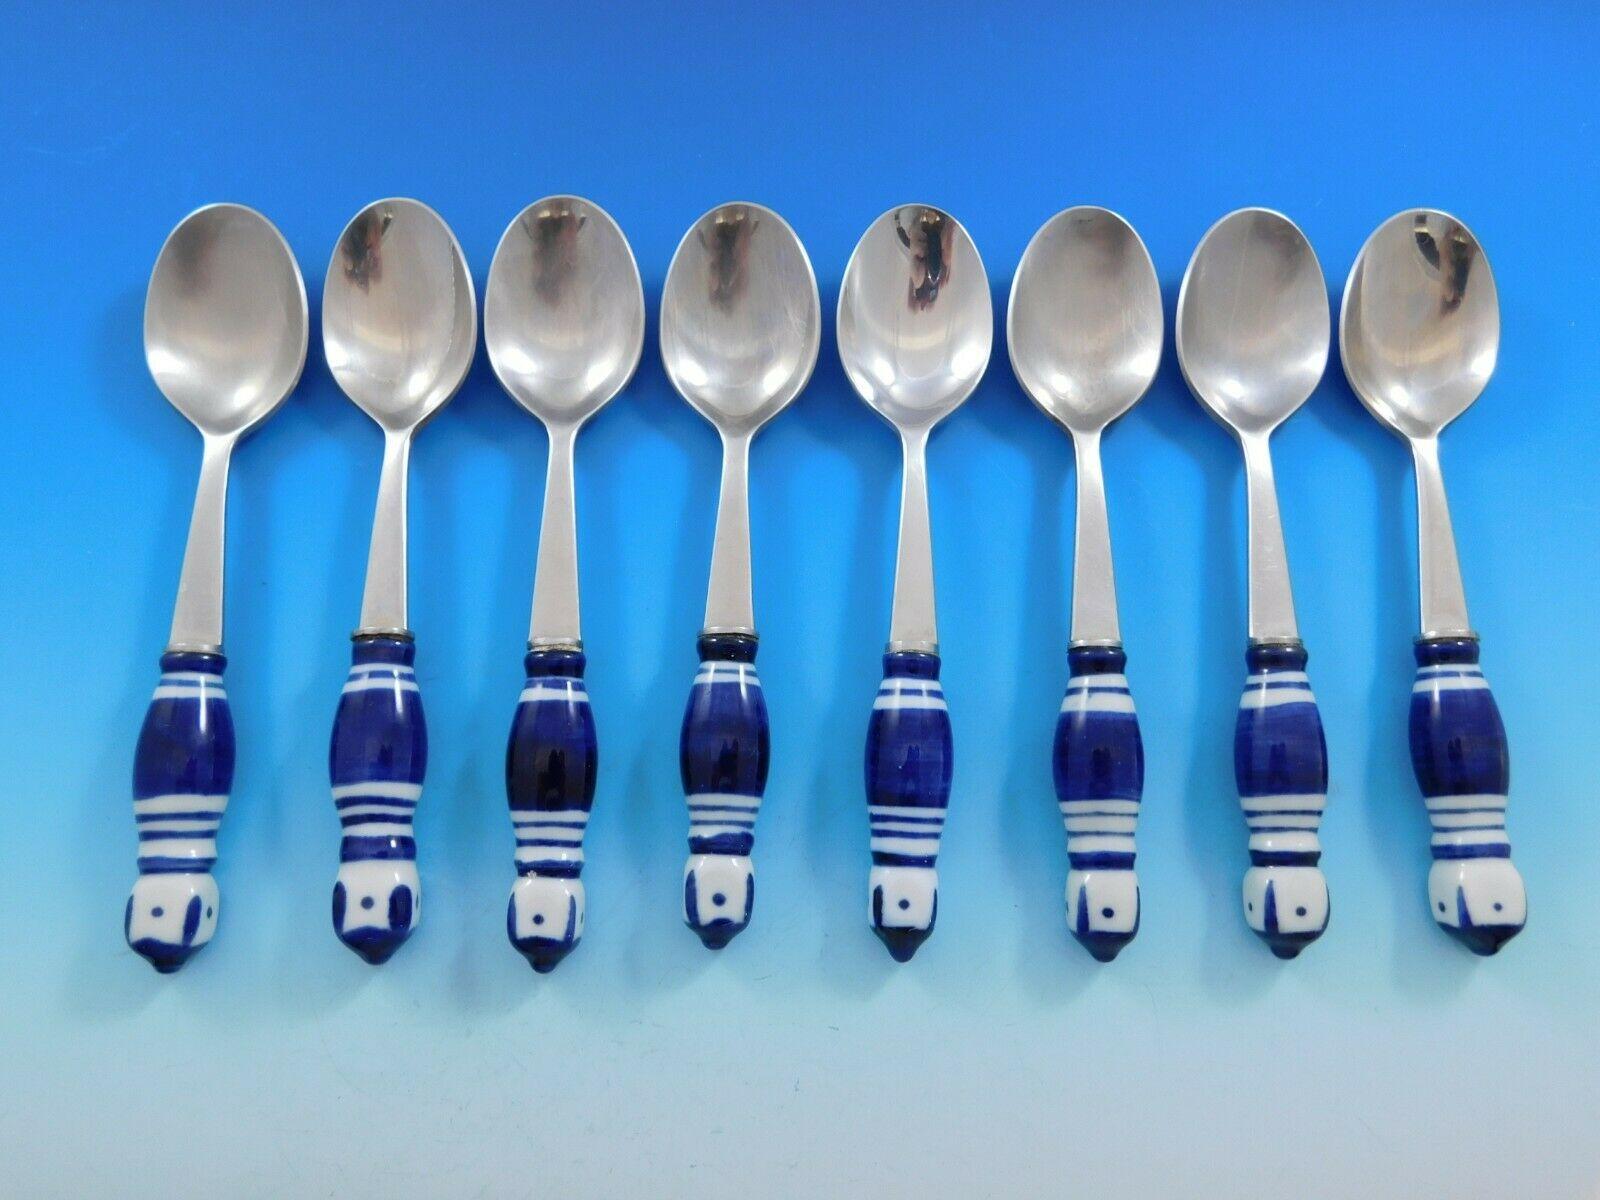 Stainless Steel Grill Blue by Rosenthal Stainless and Porcelain Flatware Service Set 52 Pcs